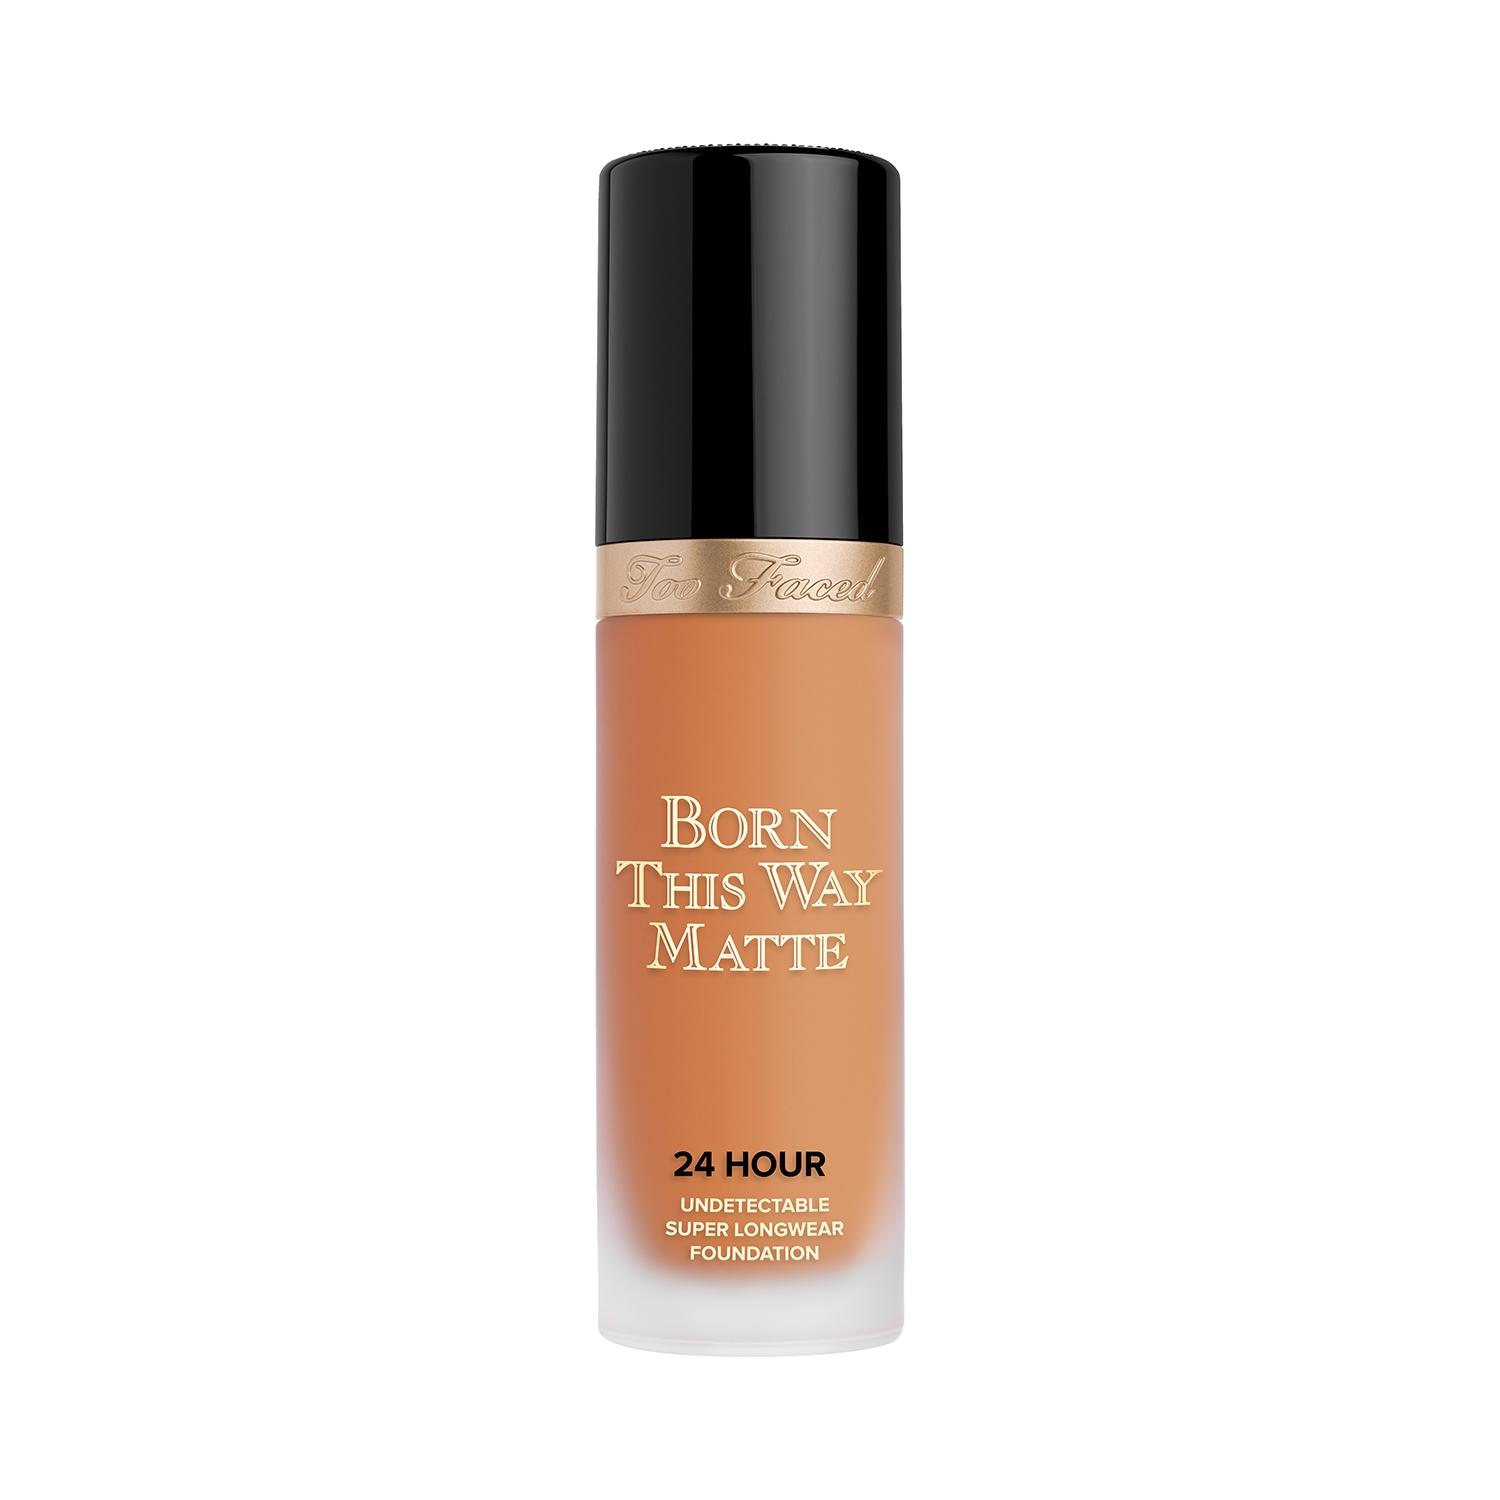 too faced born this way matte foundation - brulee (30ml)